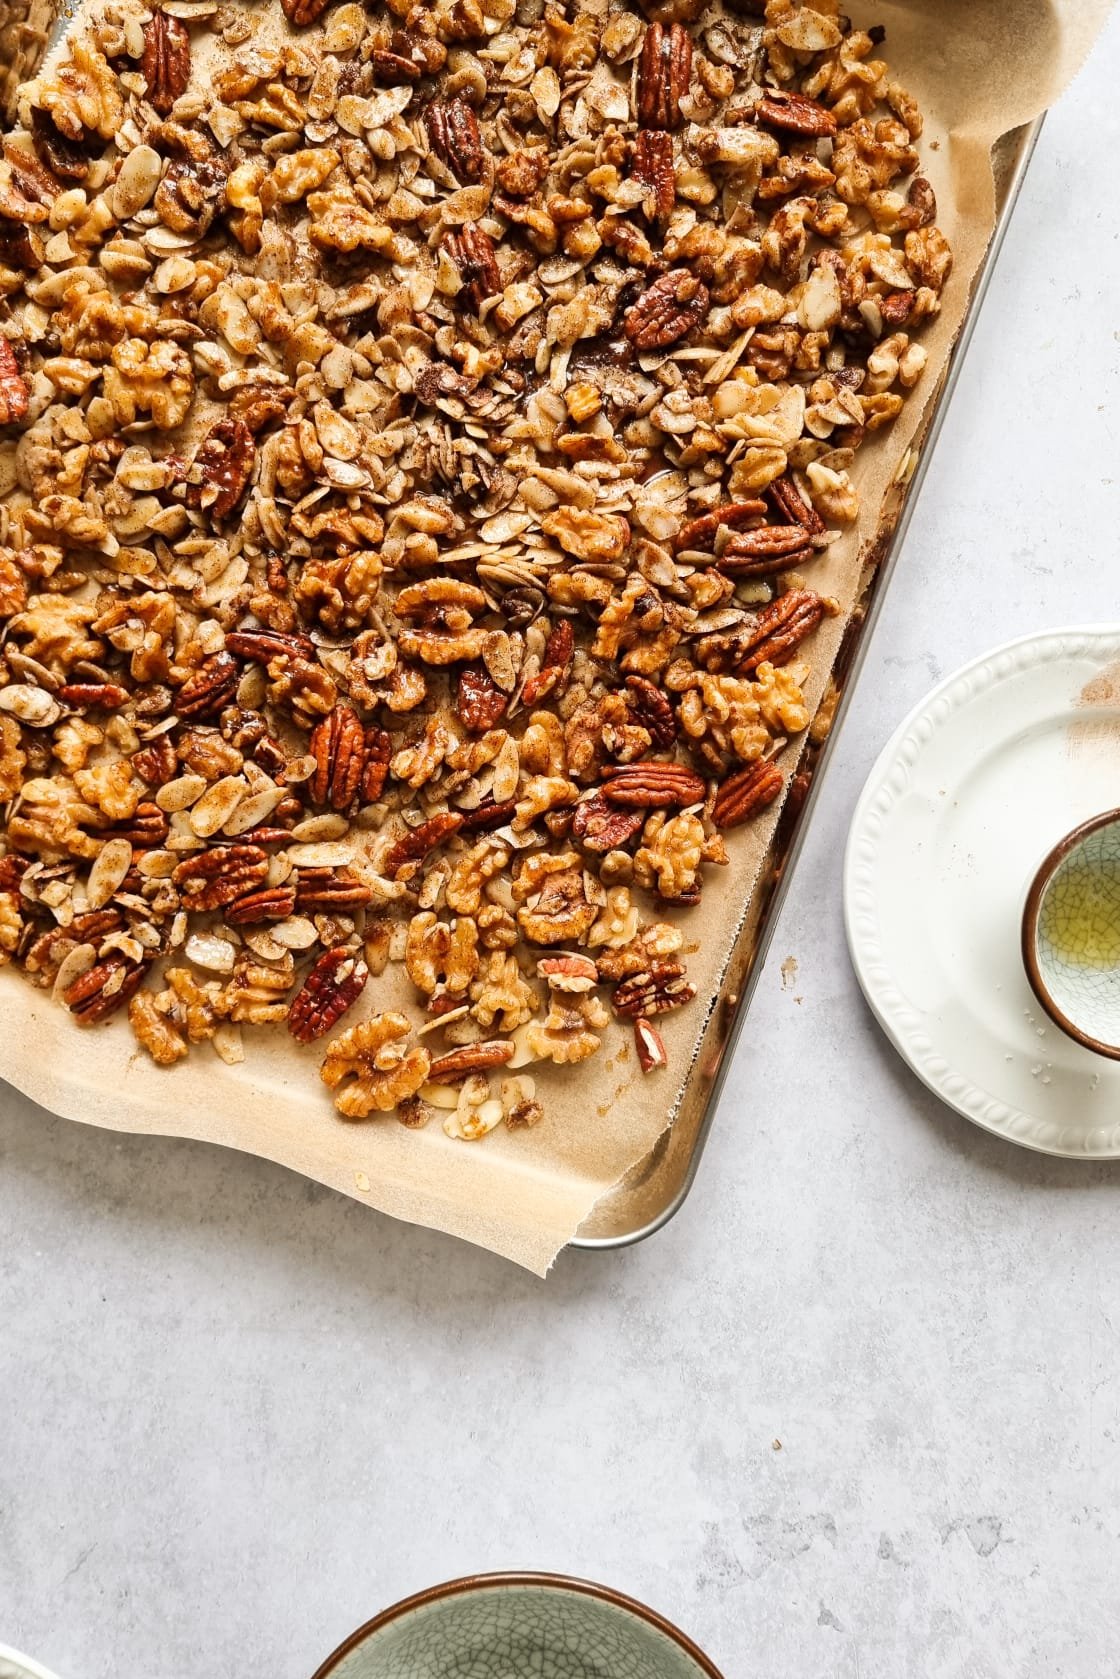 Mixed pecans, walnuts and almond flakes topped with maple syrup, melted butter and several seasonings.